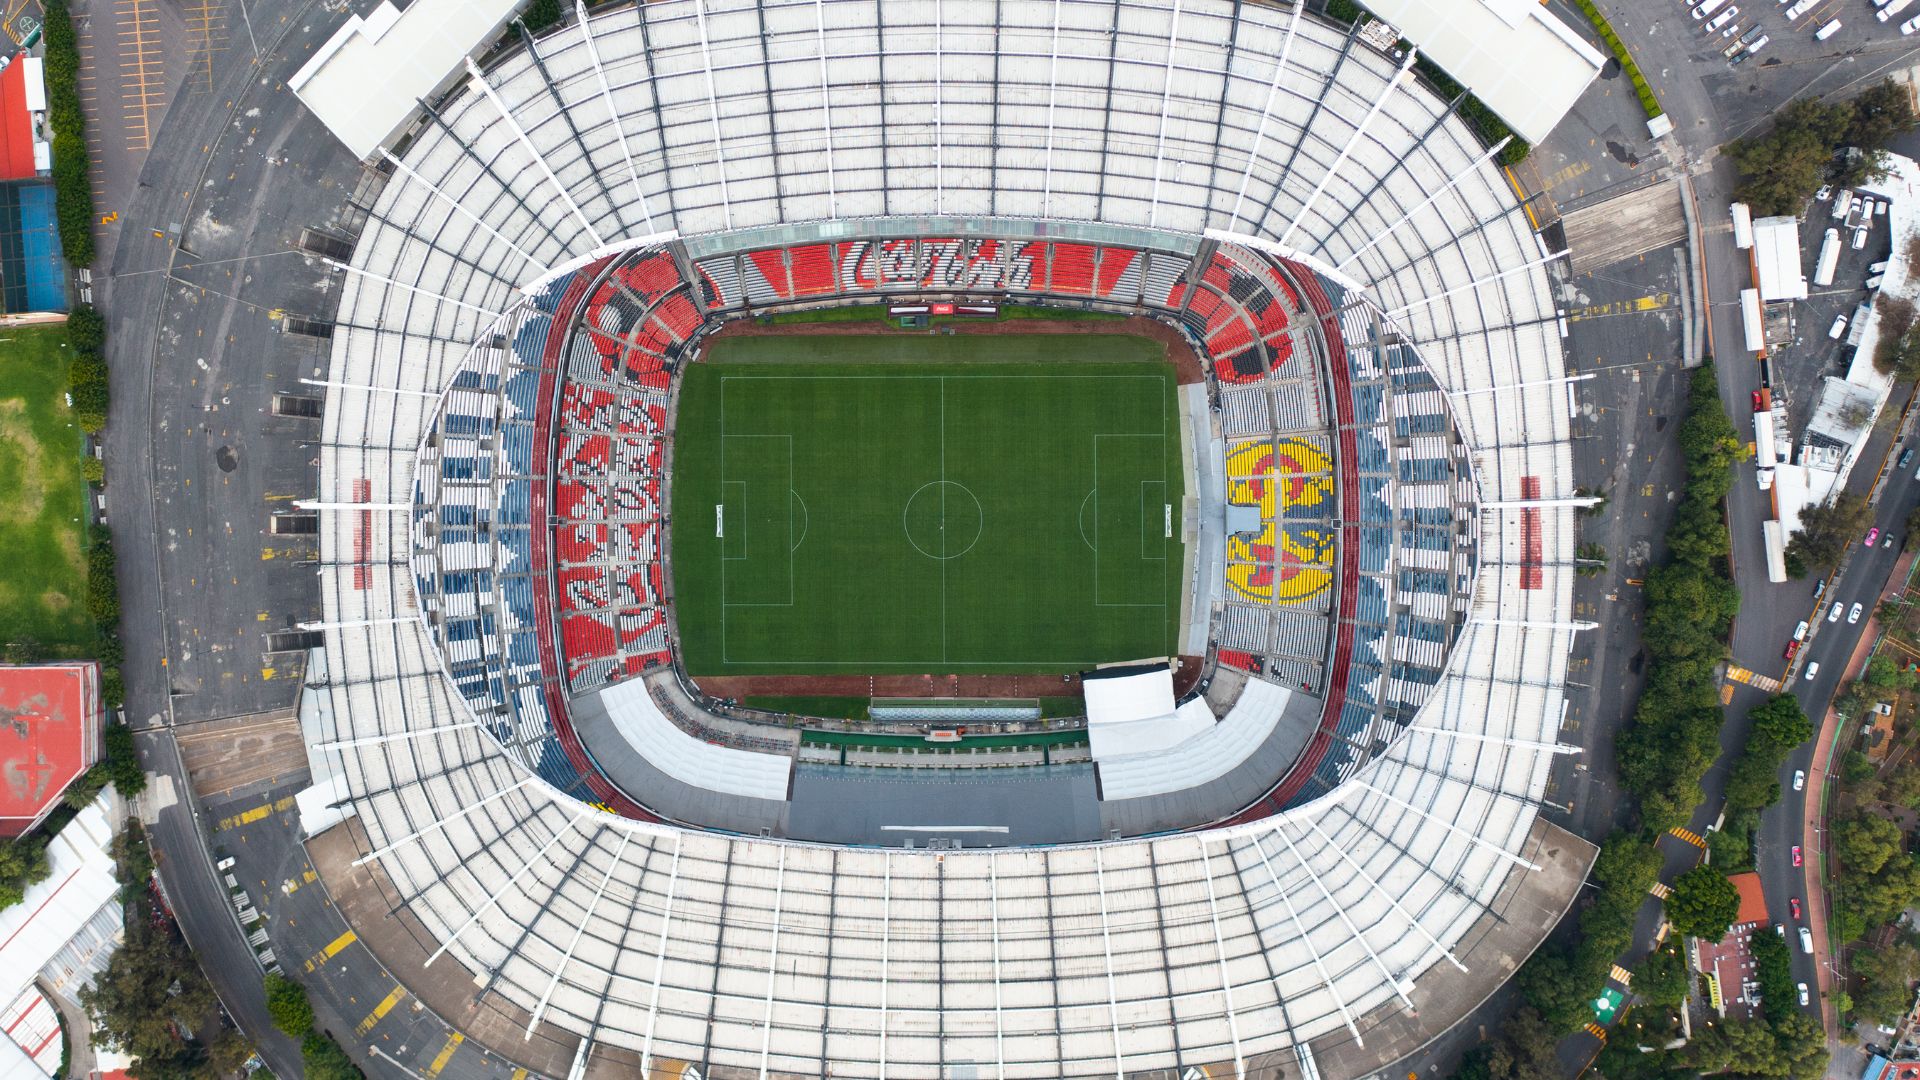 Azteca Stadium, one of the stadiums that will host 2026 World Cup matches (Credit: Getty Images)